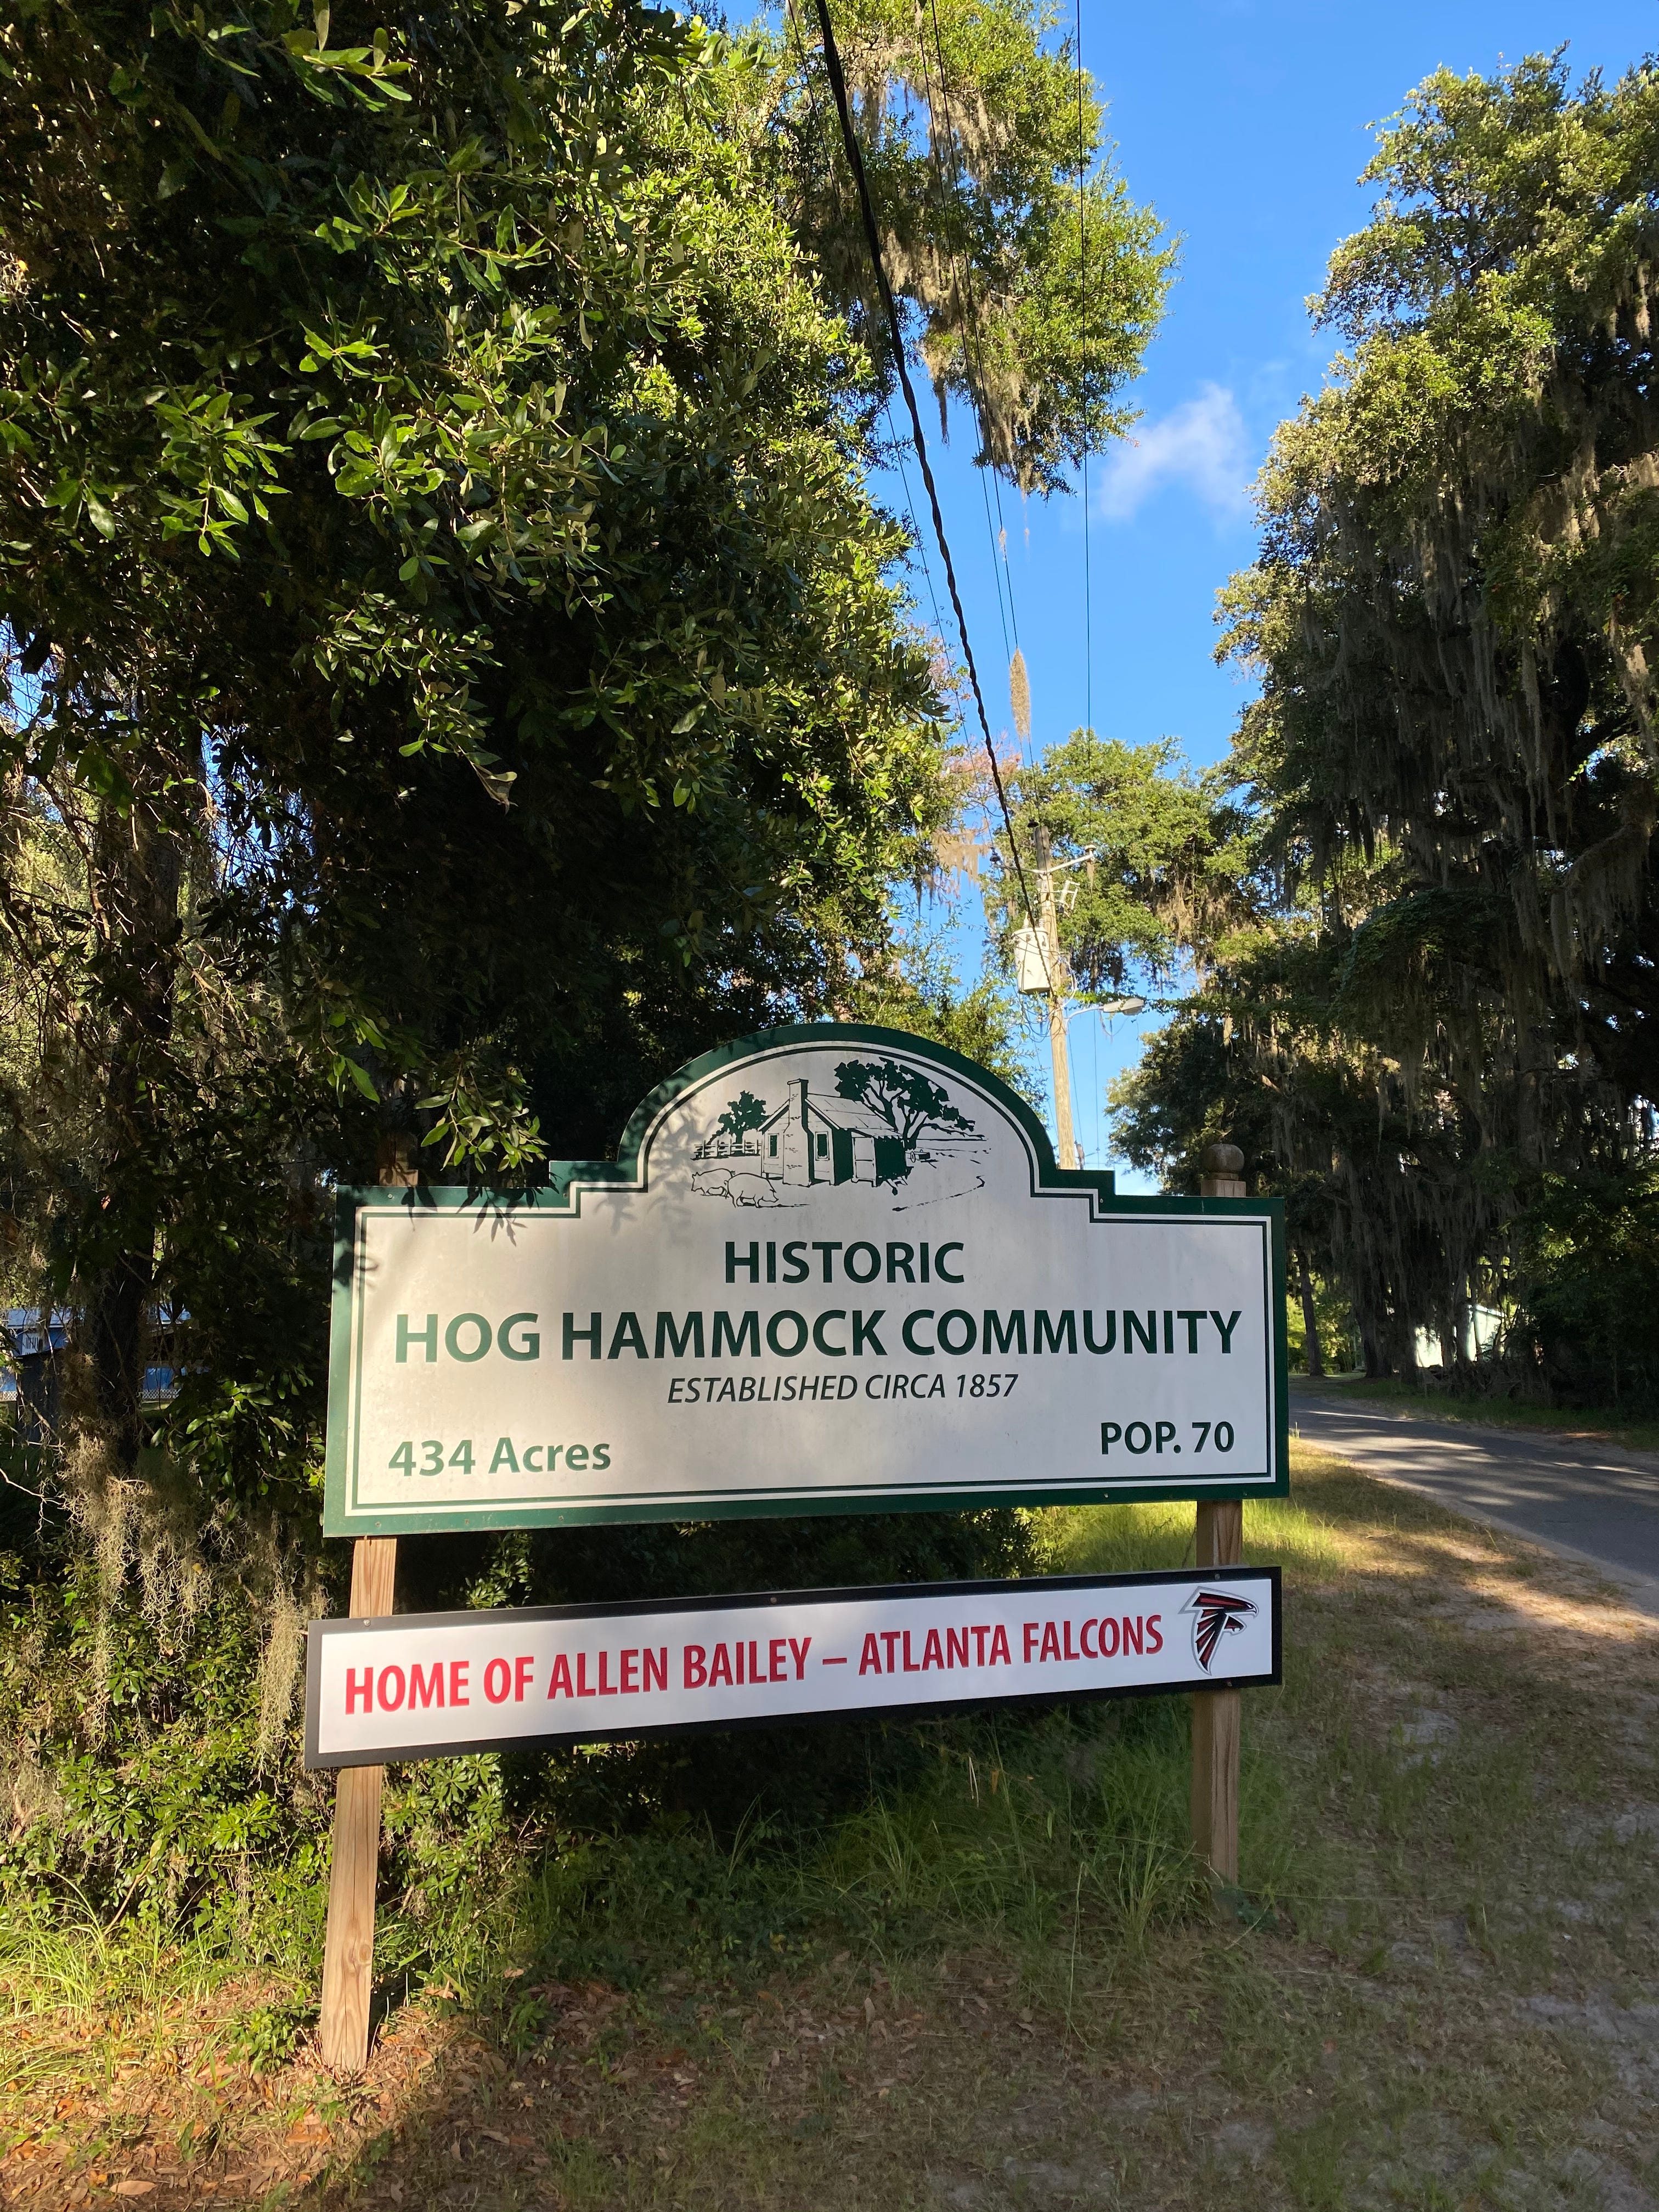 Hog Hammock is a small Black community on Sapelo Island and one of the last surviving, intact, Gullah Geechee communities in the area. Inheritance laws require documentation for proof of land ownership. The challenge: often land was handed down via verbal agreements, so there is no written documentation.